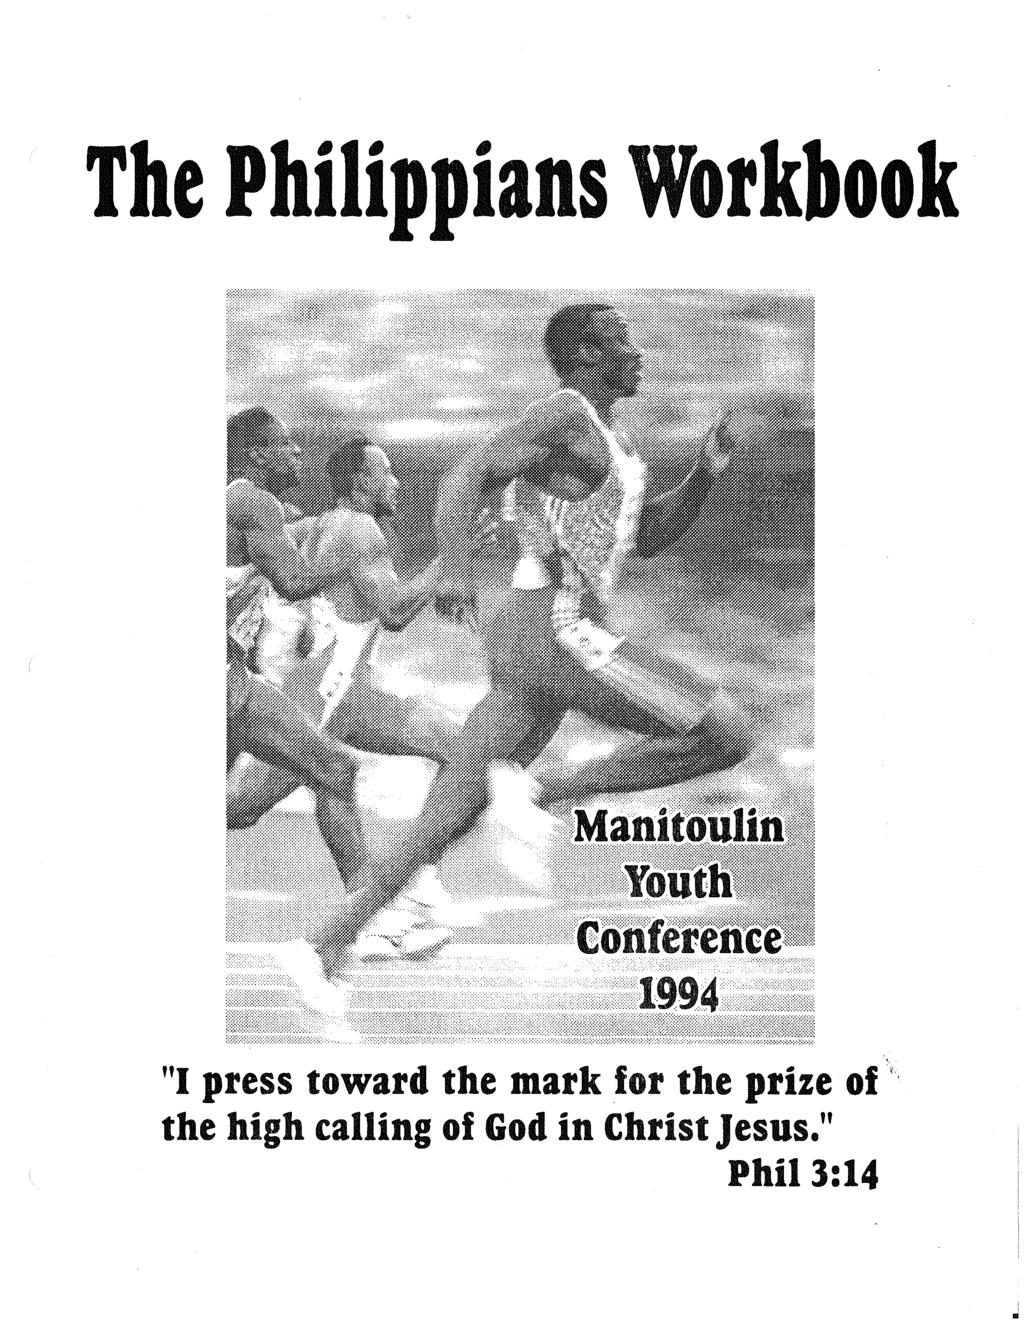 The Philippians Workbook "I press toward the mark for the